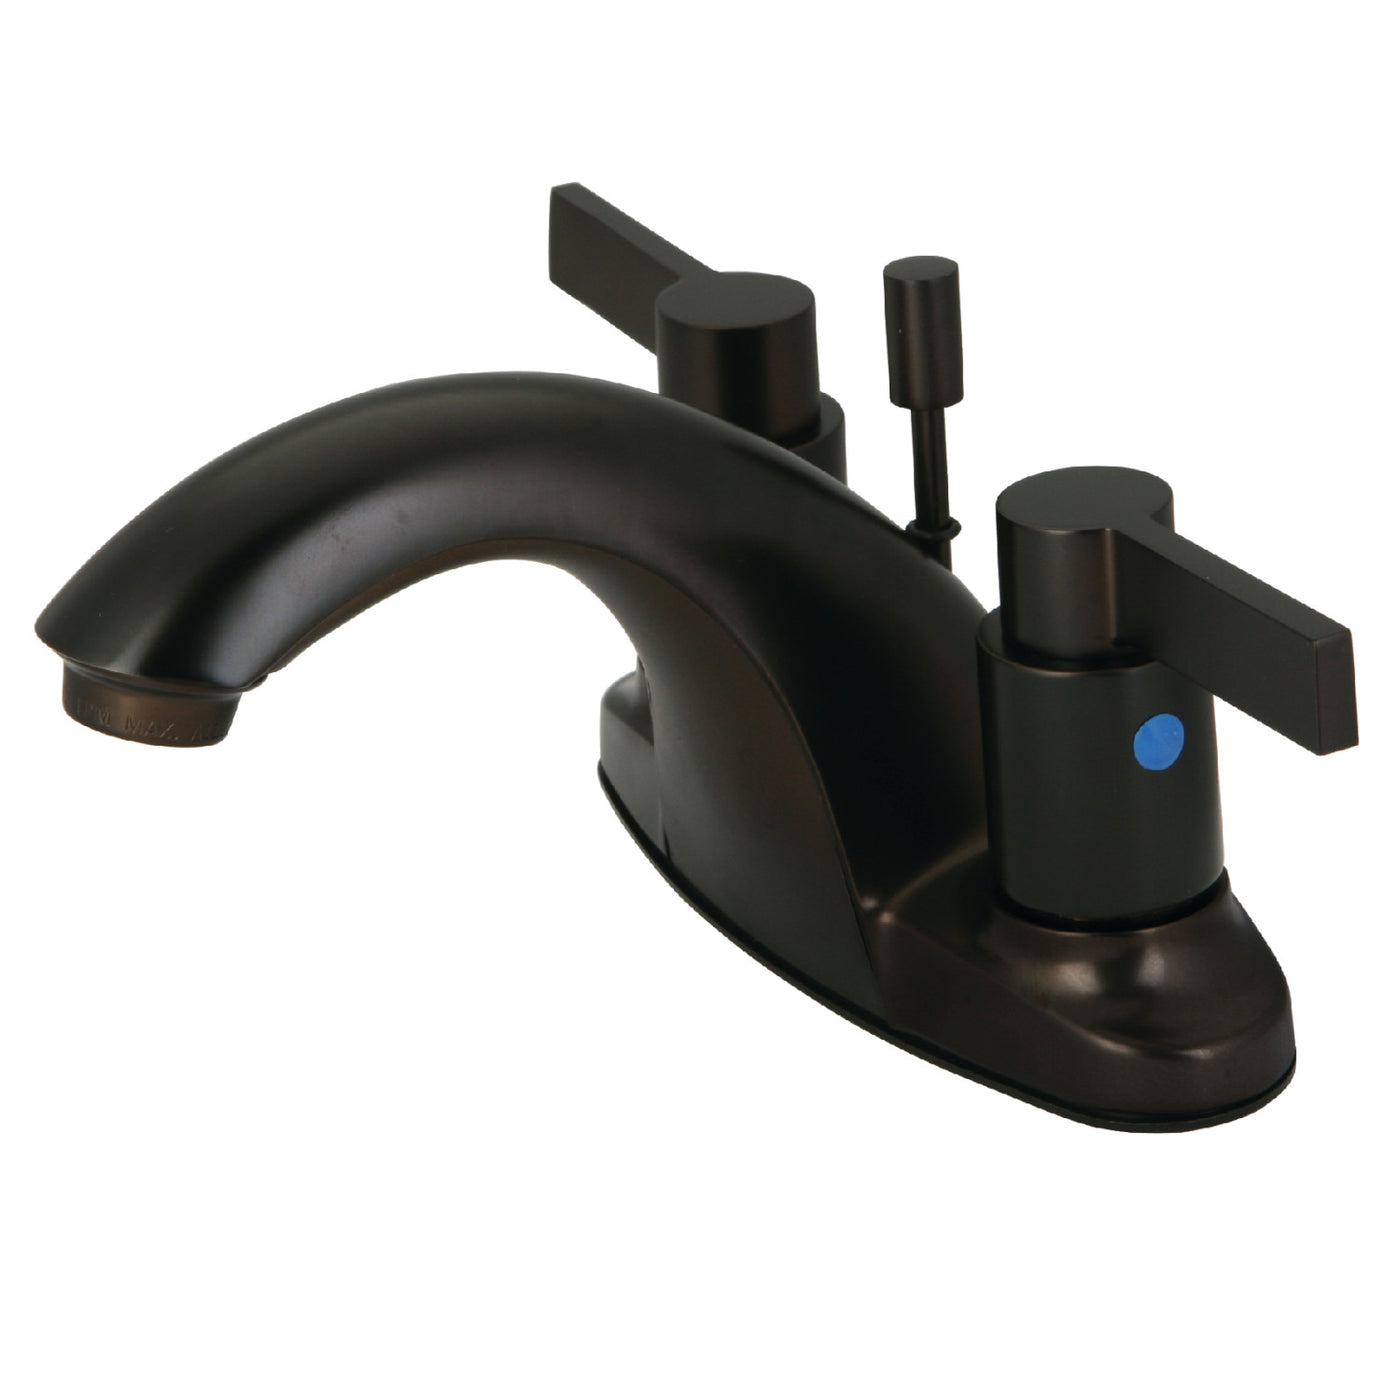 Elements of Design EB8645NDL 4-Inch Centerset Bathroom Faucet with Retail Pop-Up, Oil Rubbed Bronze